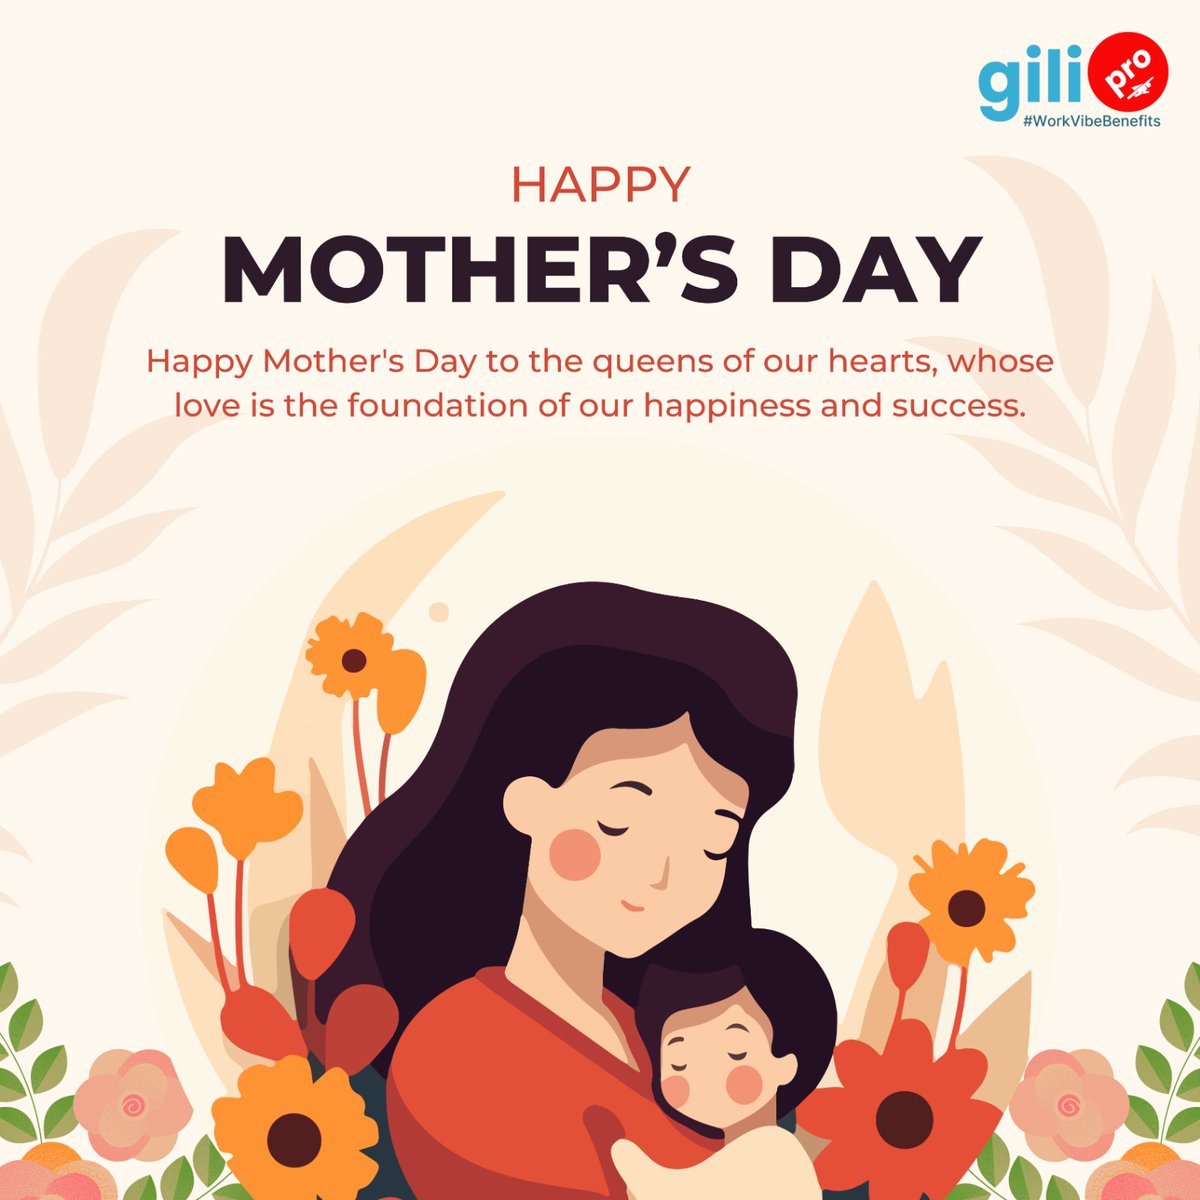 Cheers to the one who's always been our anchor in the stormy seas of life. Happy Mother's Day! ⚓💖

#gilipro #mothersday #happymothersday #mothersday2024 #motherhood #mother #women #mothersdayspecial #employeewellness #workvibebenefits #employeebenefits